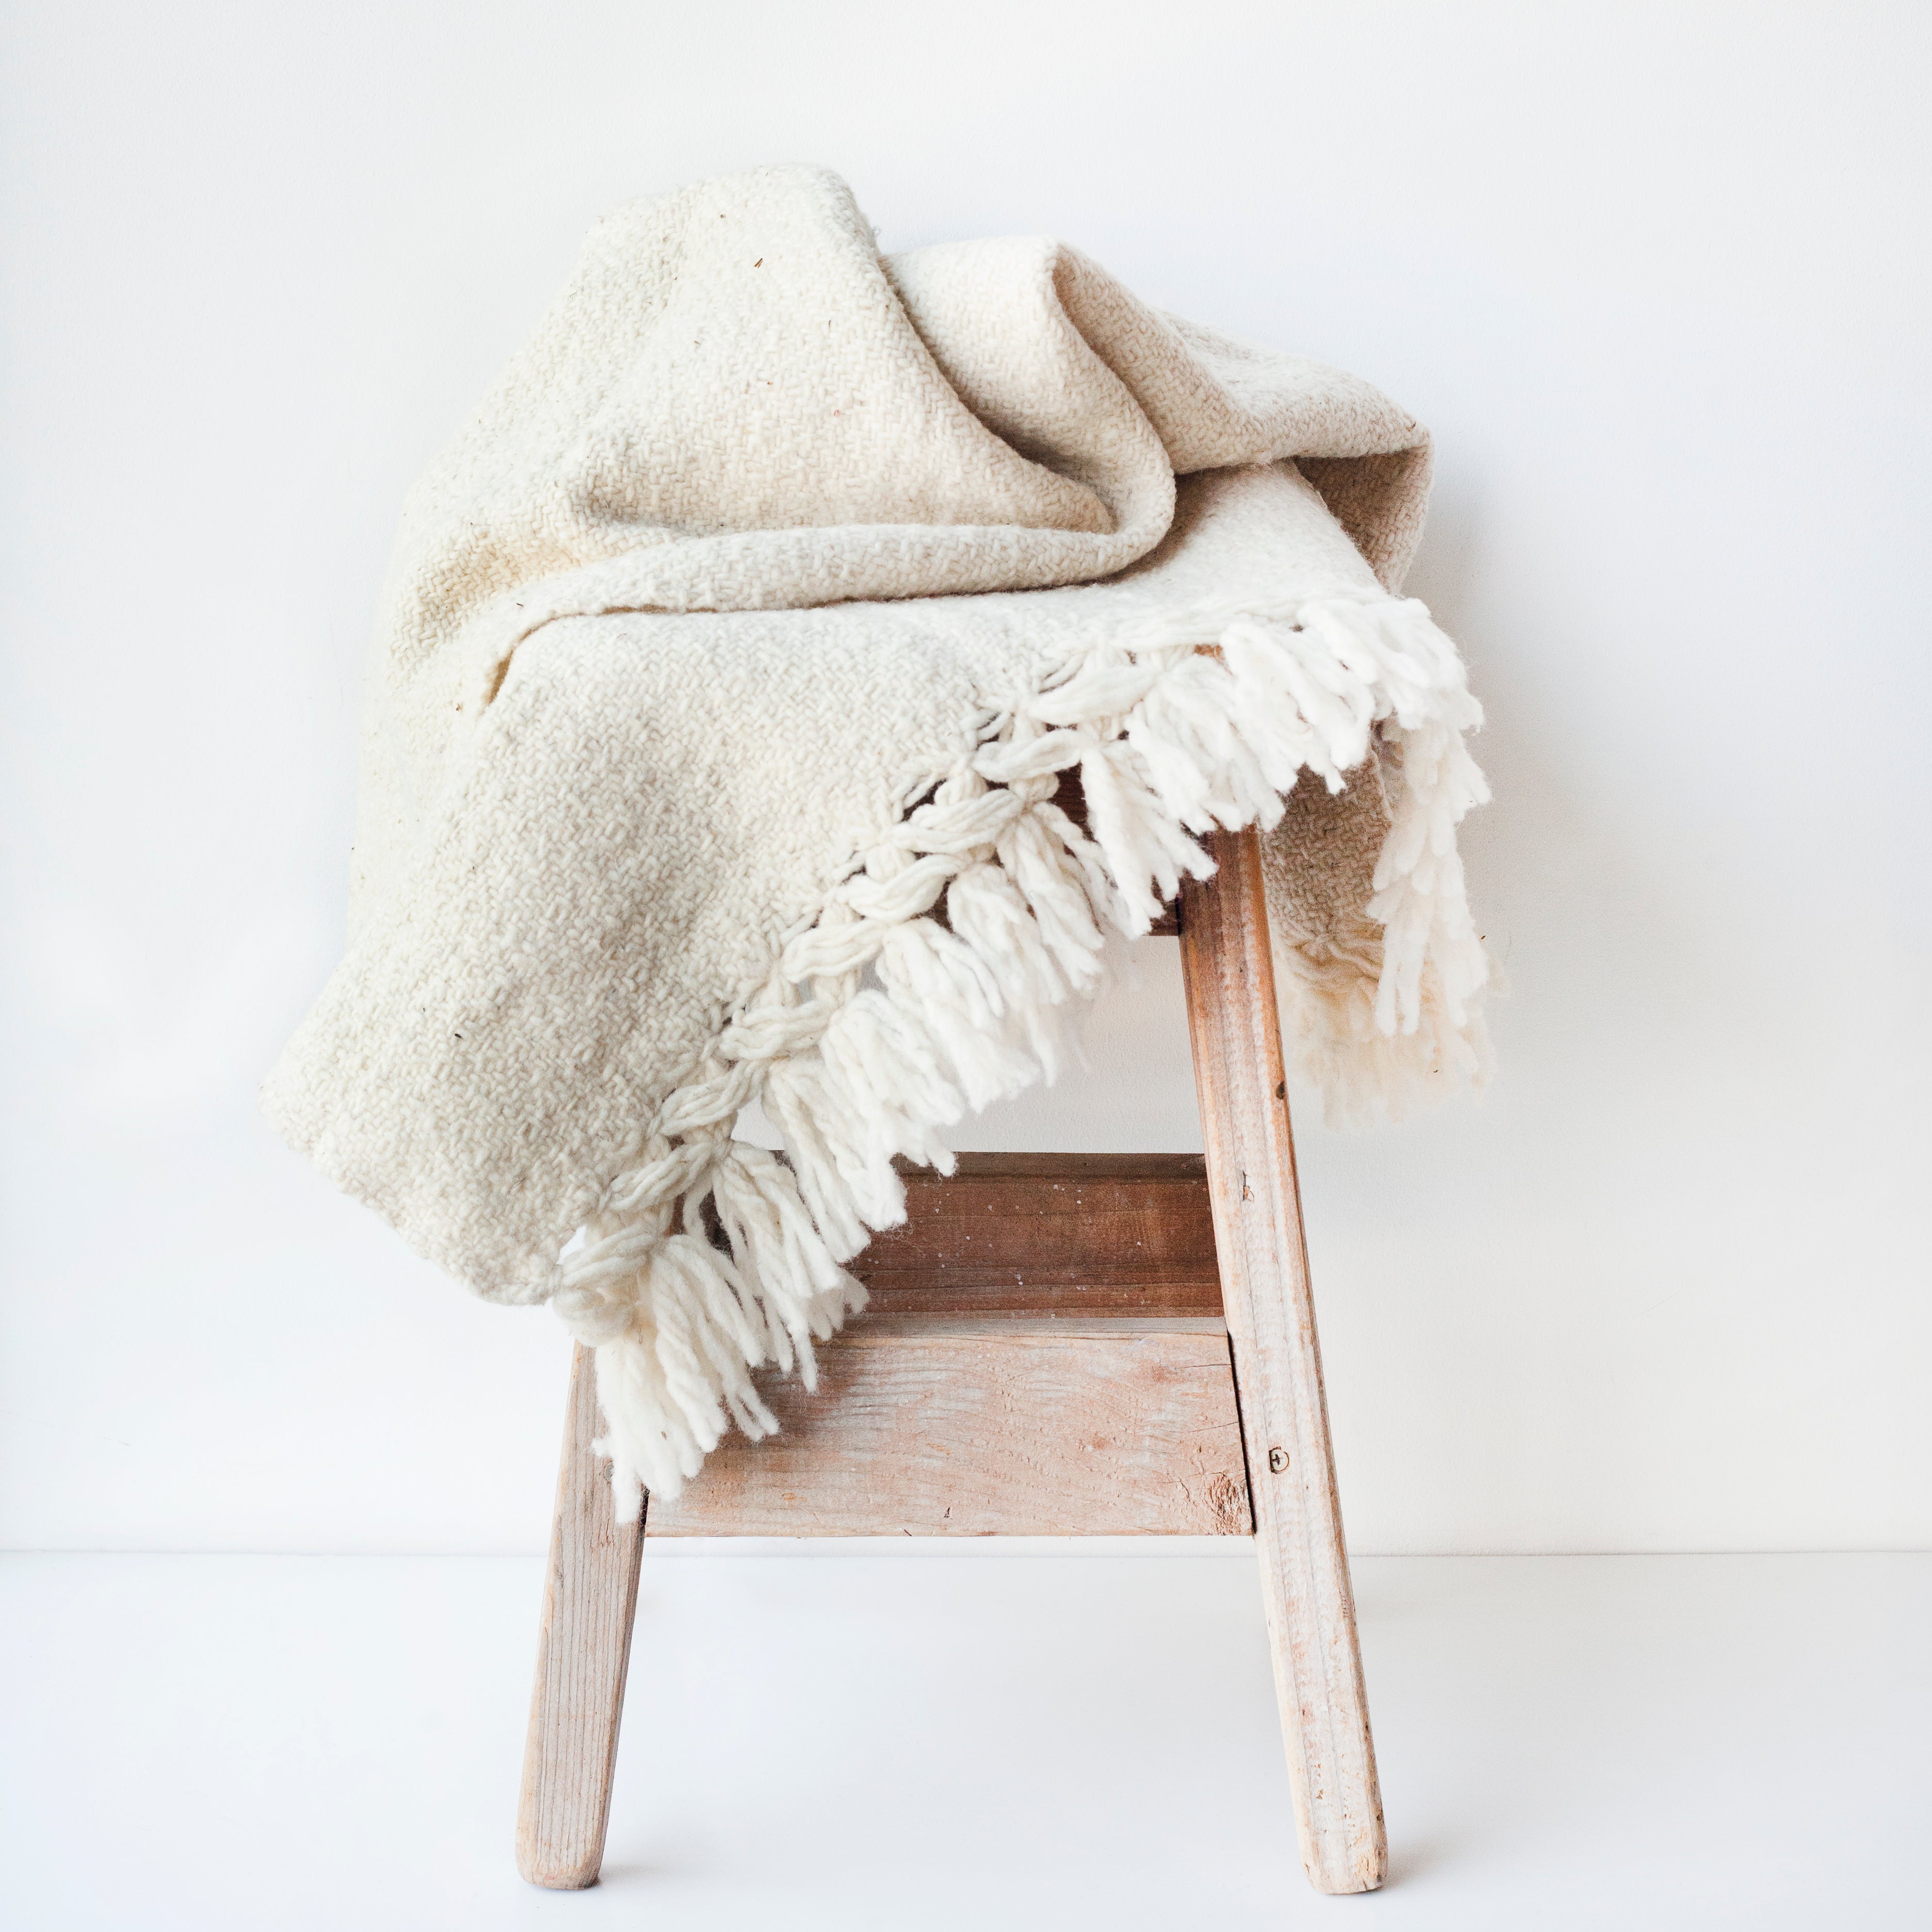 Cream wool throw blanket woven in a diamond pattern with hand tied tassels at each end draped over a wood stool